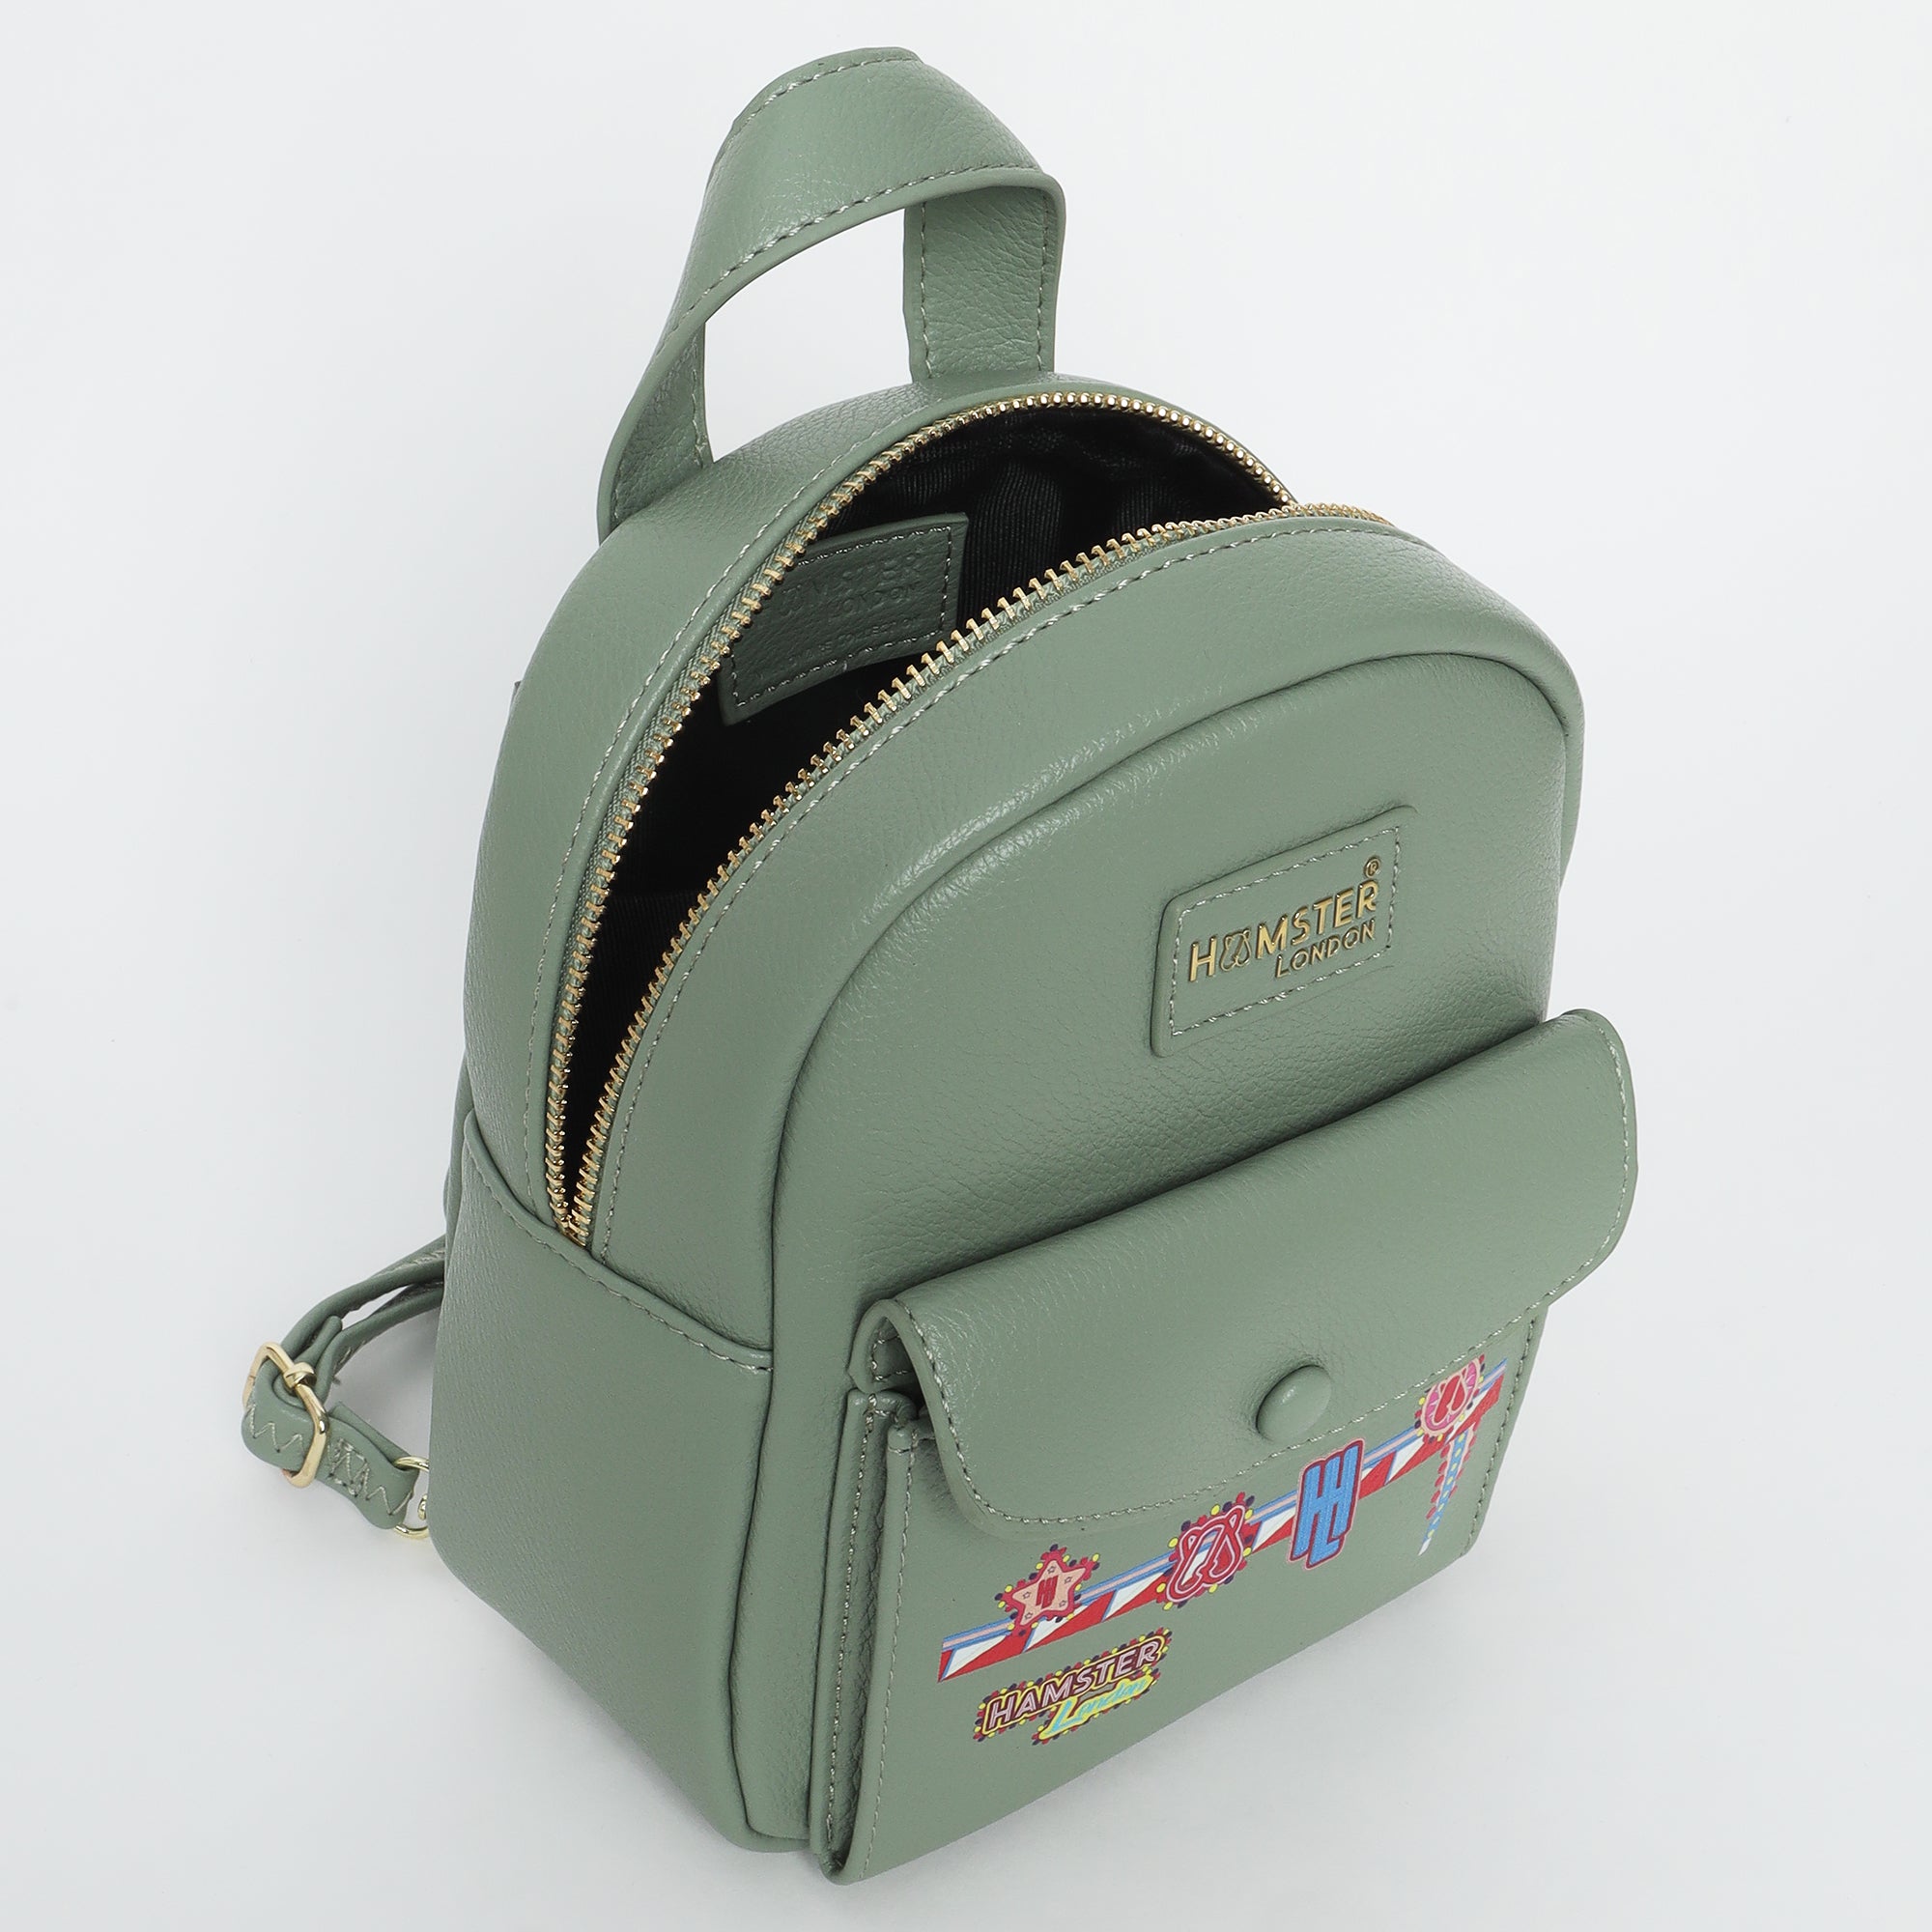 HL Millionaire Picadelly Circus Mini Backpack Green